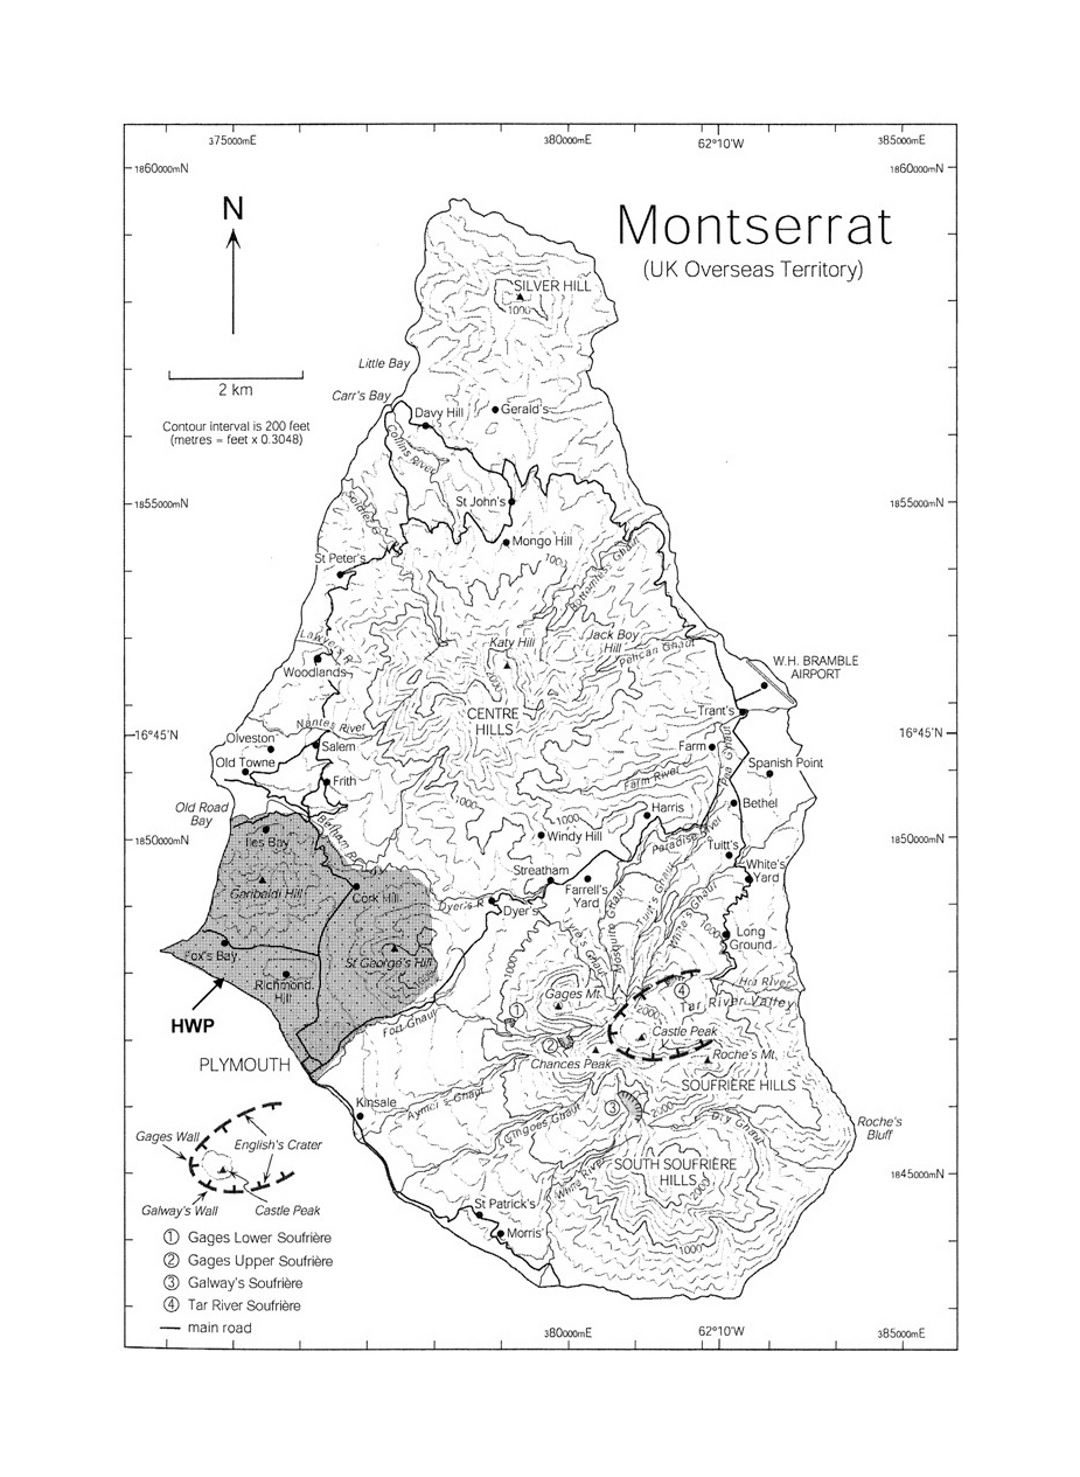 Detailed topographical map of Montserrat island